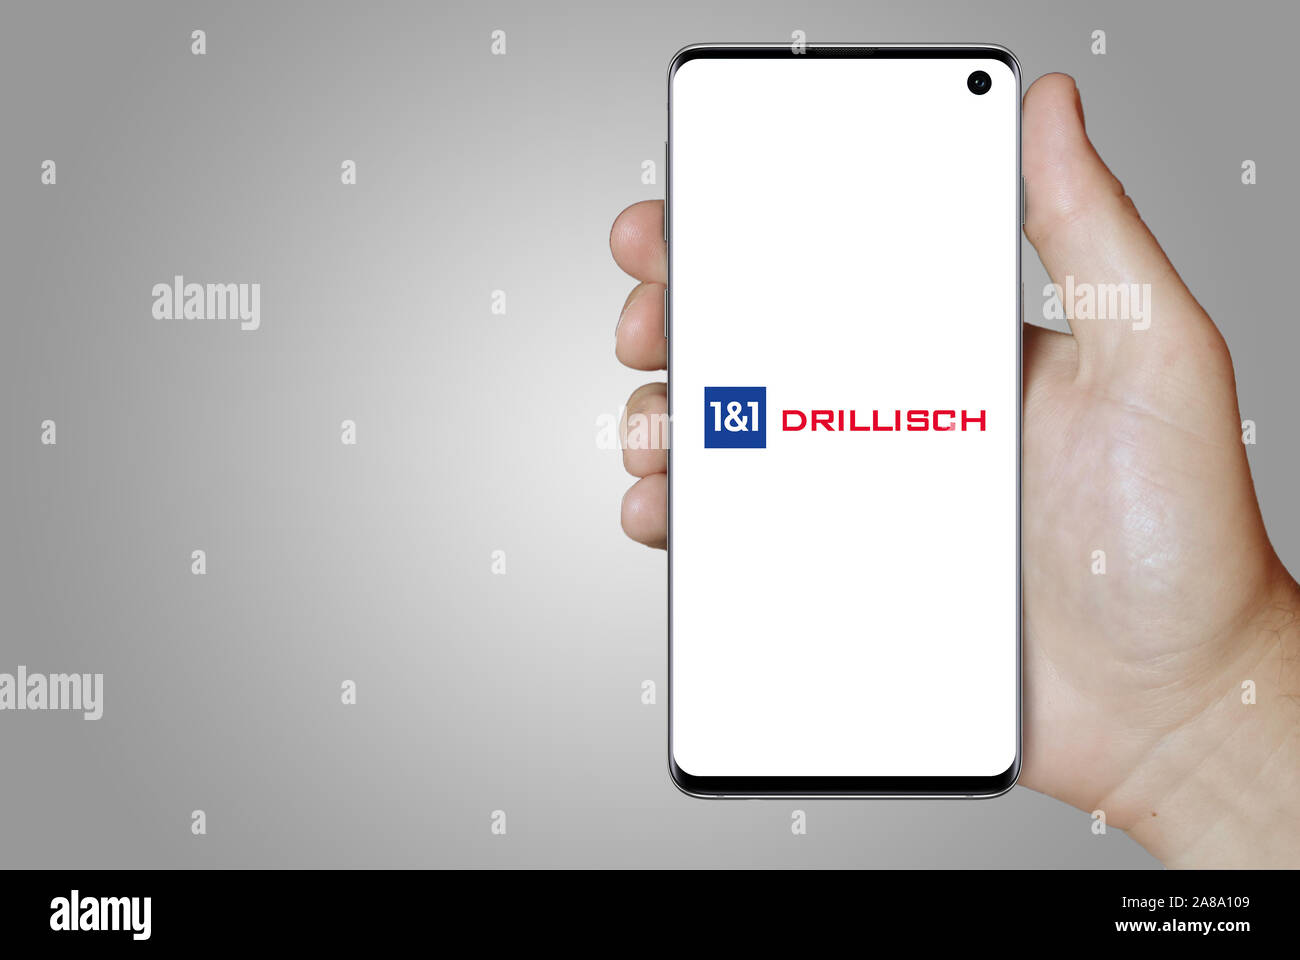 Logo Of Public Company 1 1 Drillisch Displayed On A Smartphone Grey Background Credit Pixduce Stock Photo Alamy